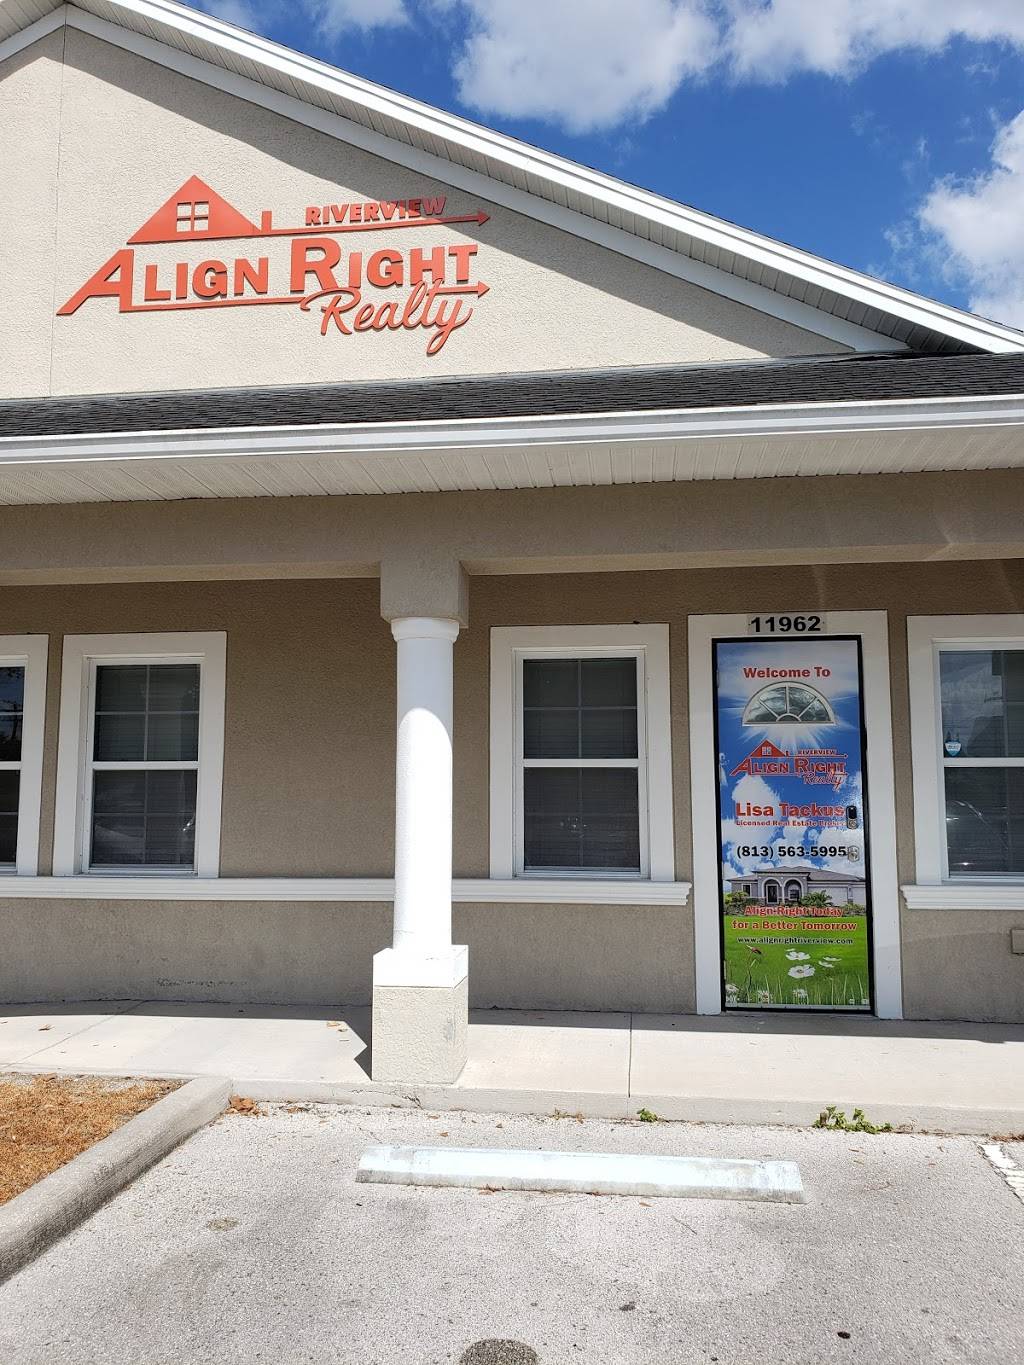 Align Right Realty Riverview | 11962 Balm Riverview Rd, Riverview, FL 33569, USA | Phone: (813) 563-5995